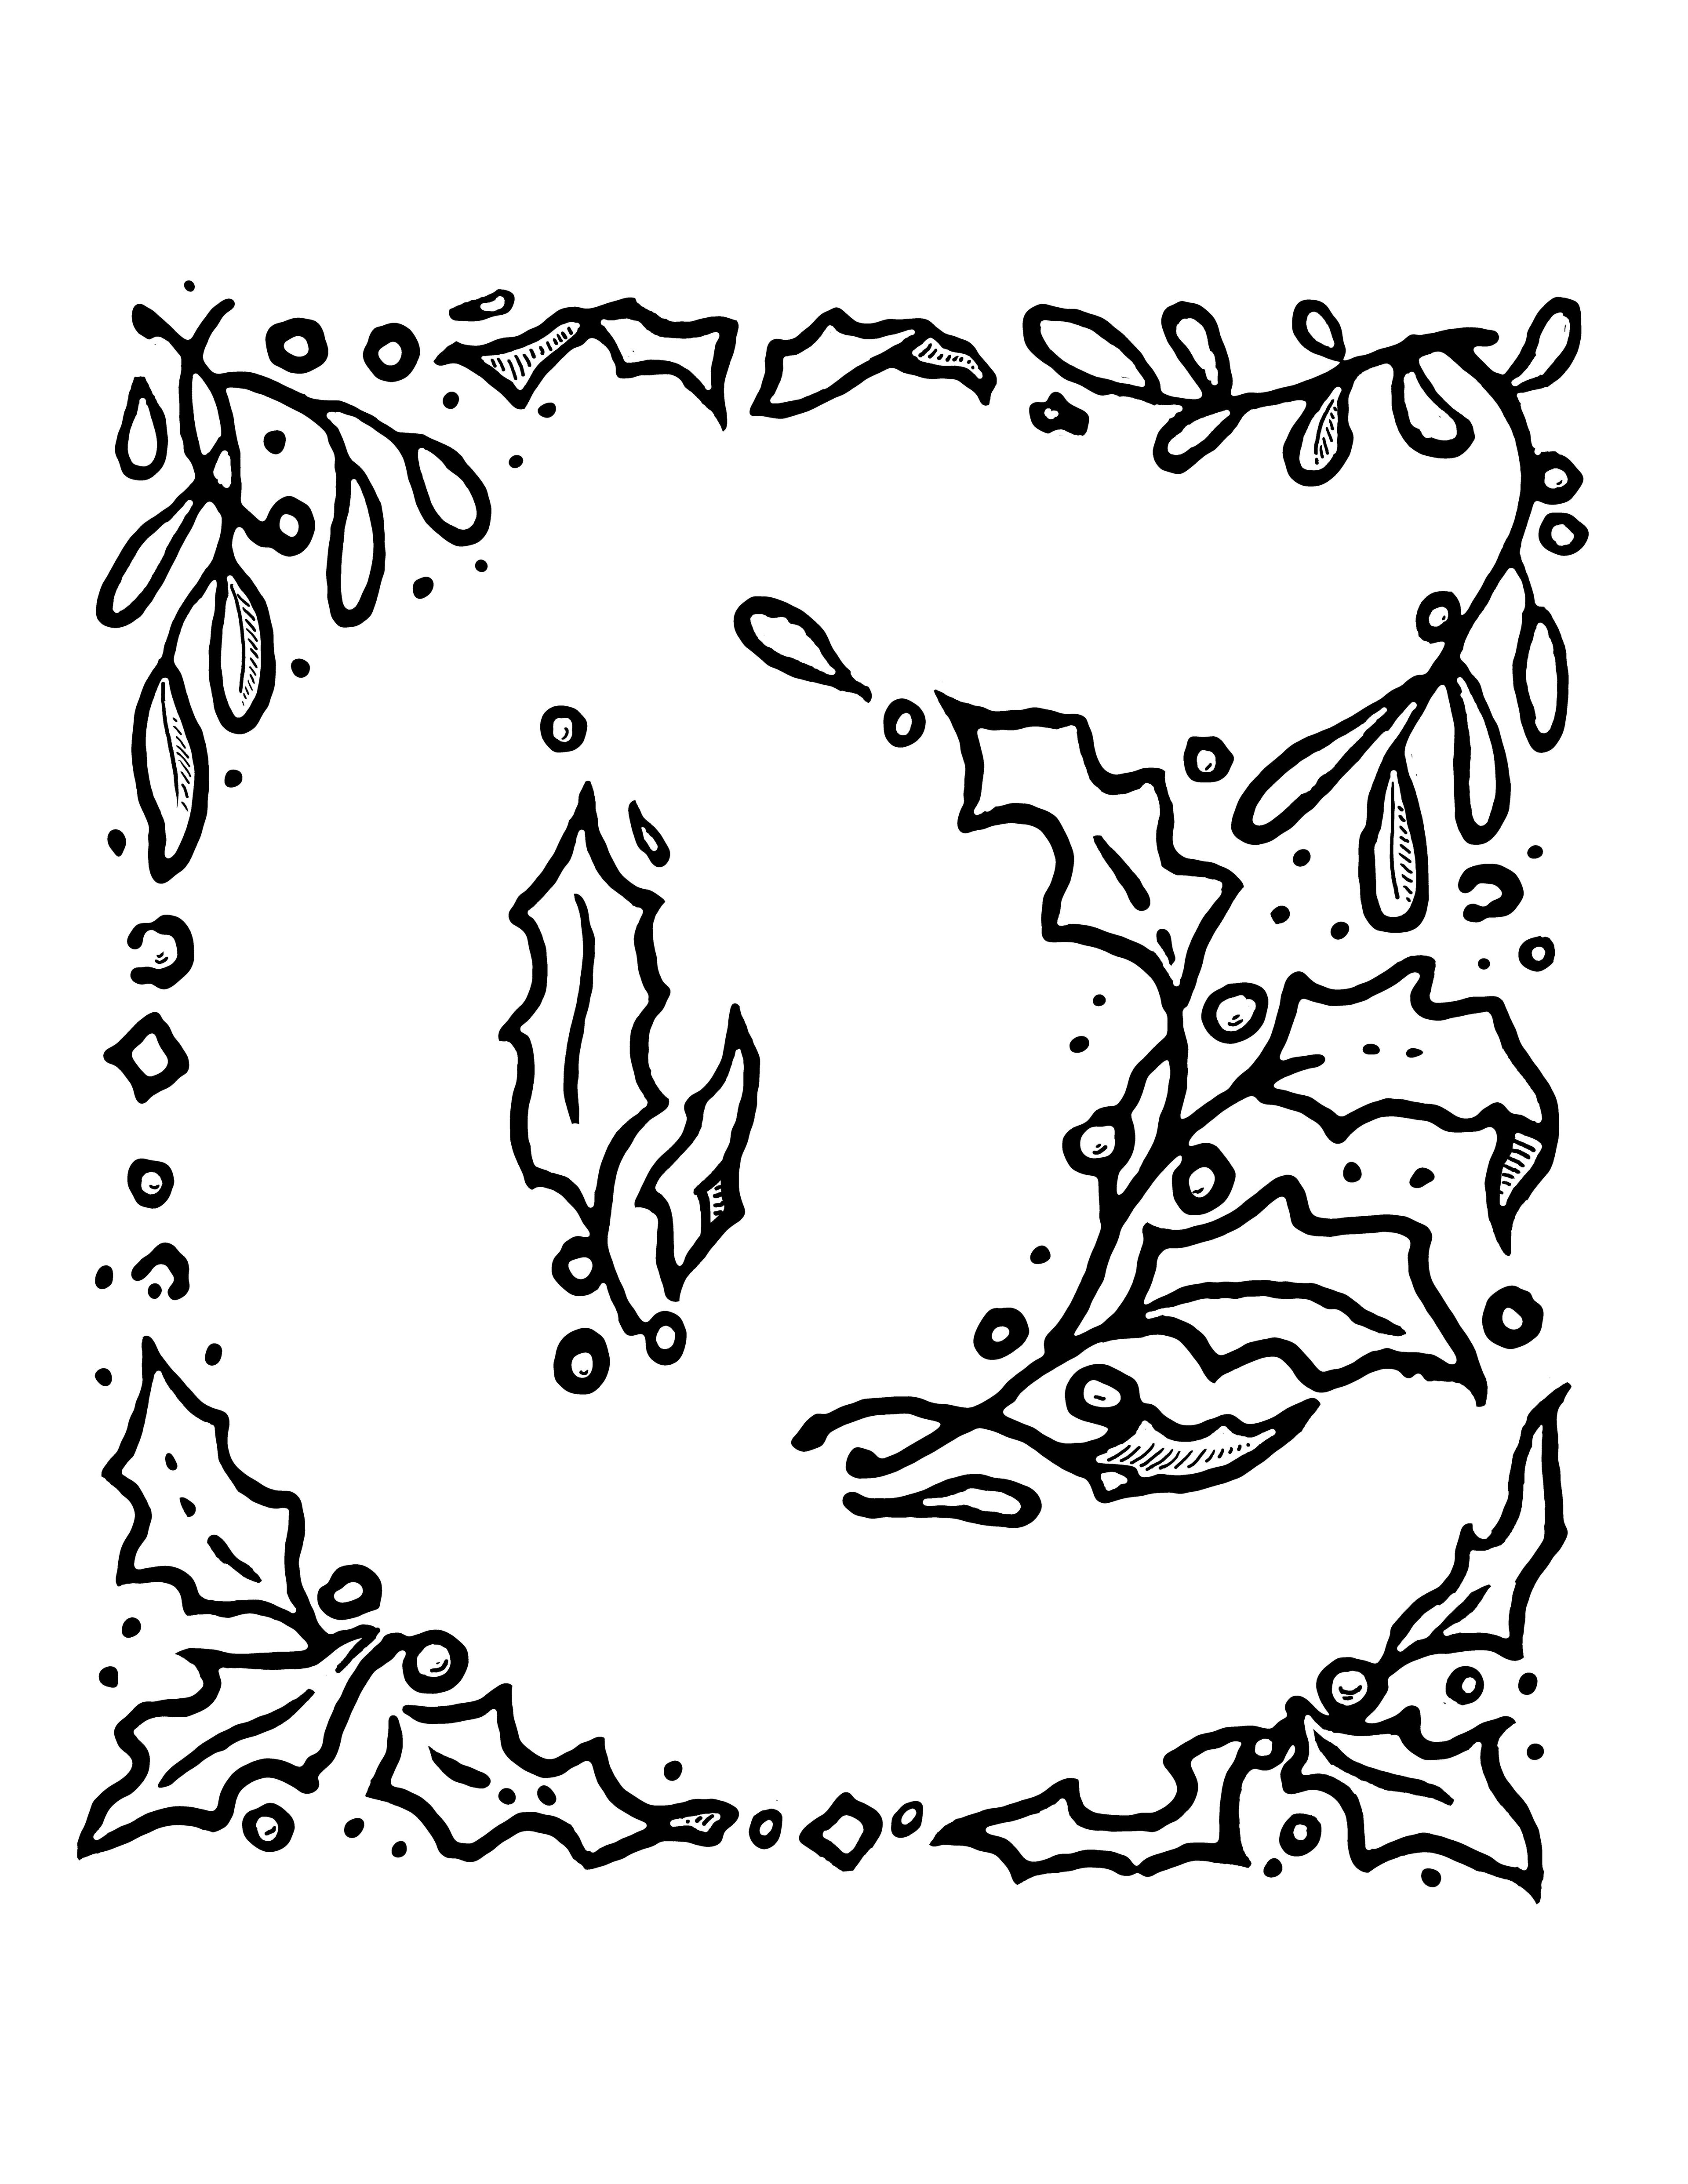 A coloring page of holly leaves forming a capital C.